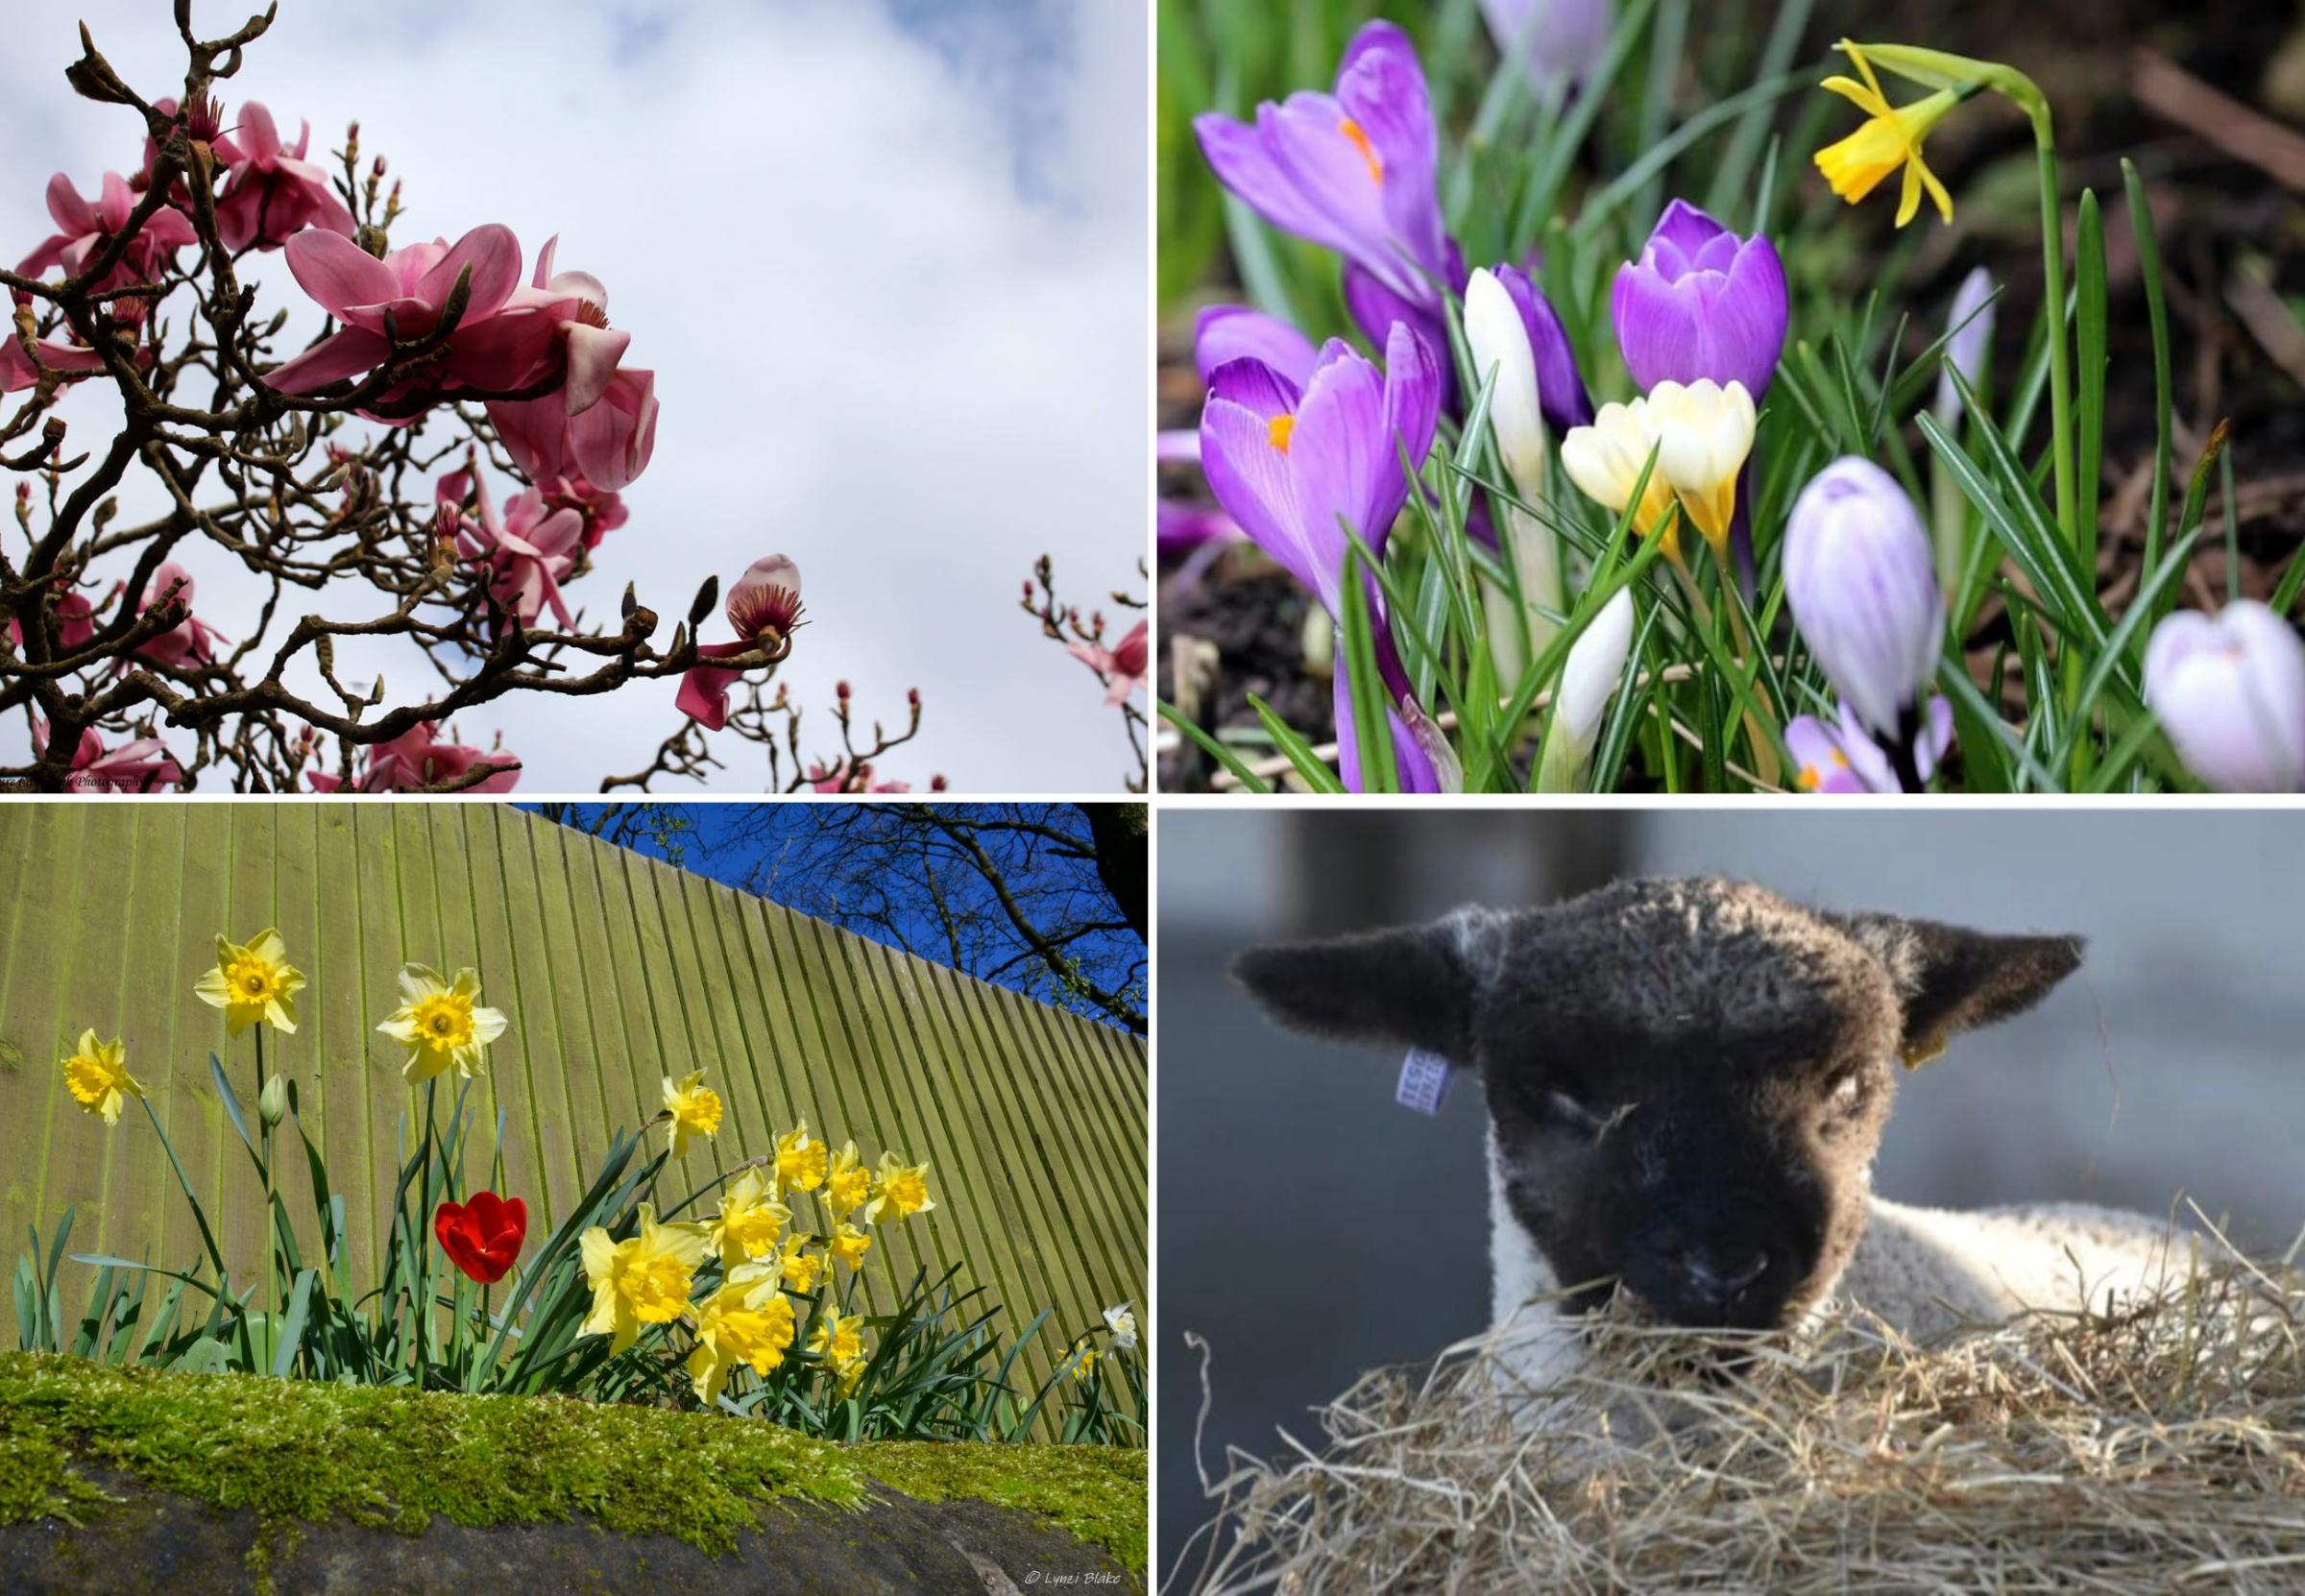 Photographers capture the first day of spring in M